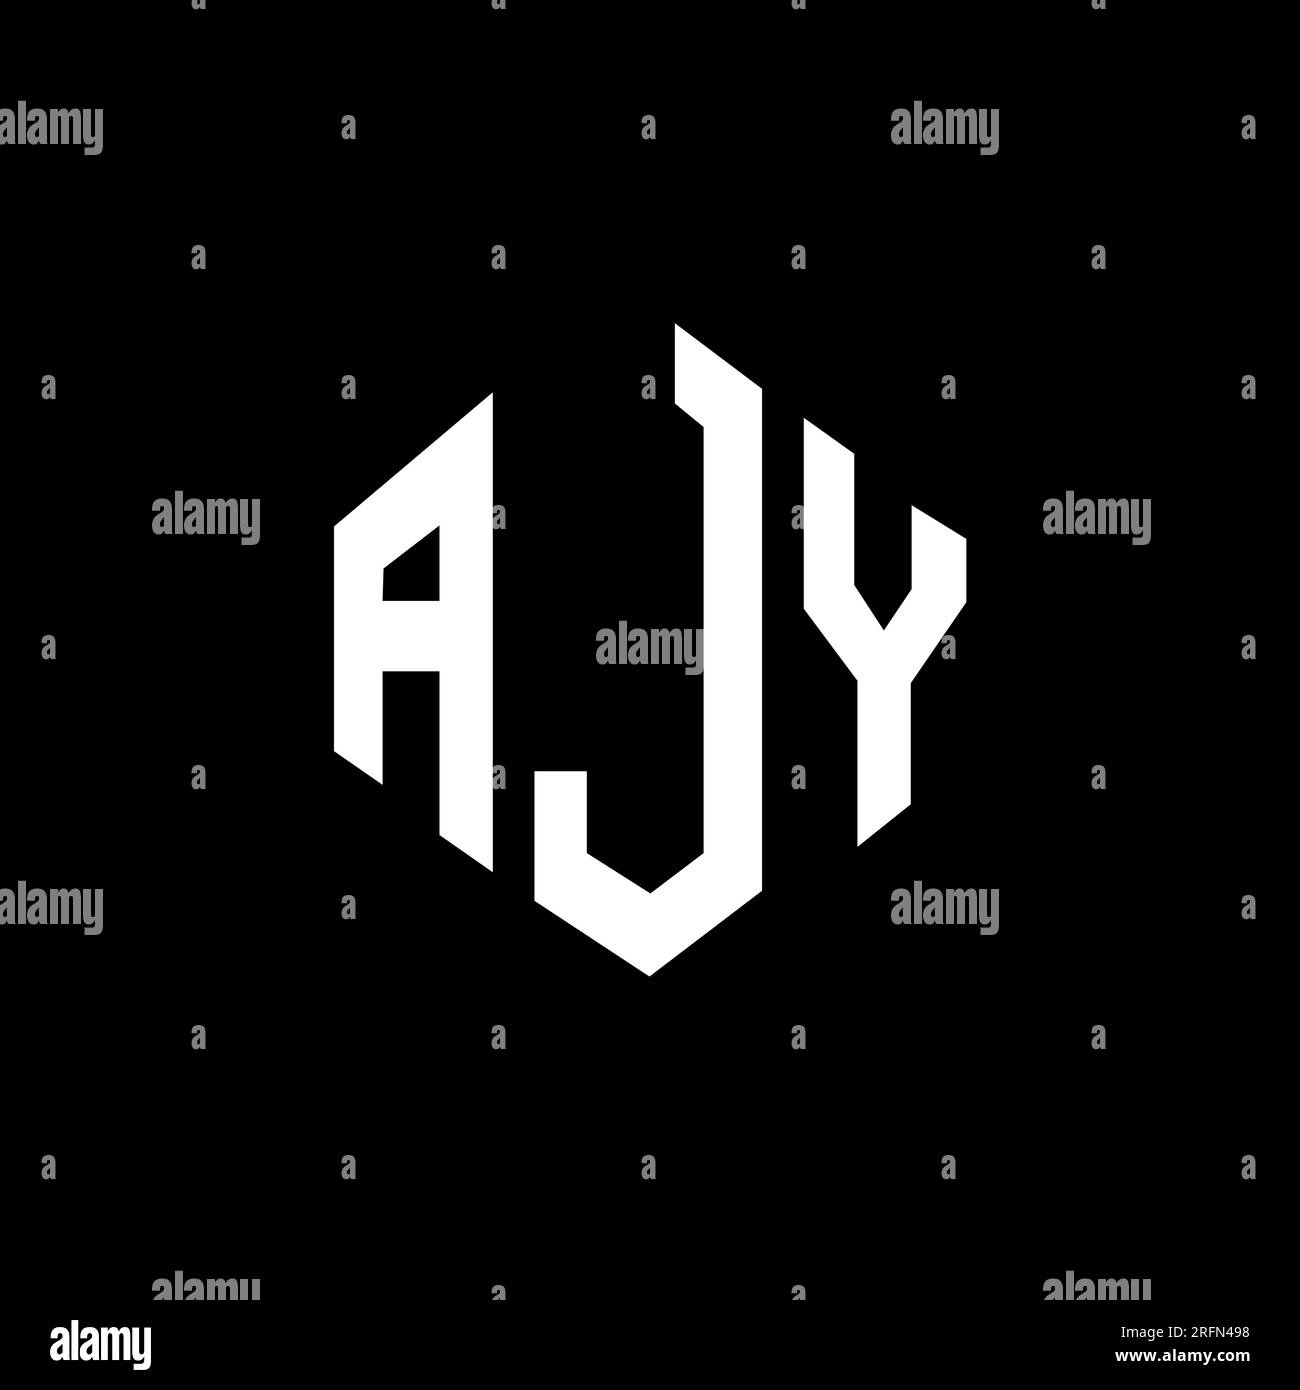 Ajy cube Black and White Stock Photos & Images - Alamy